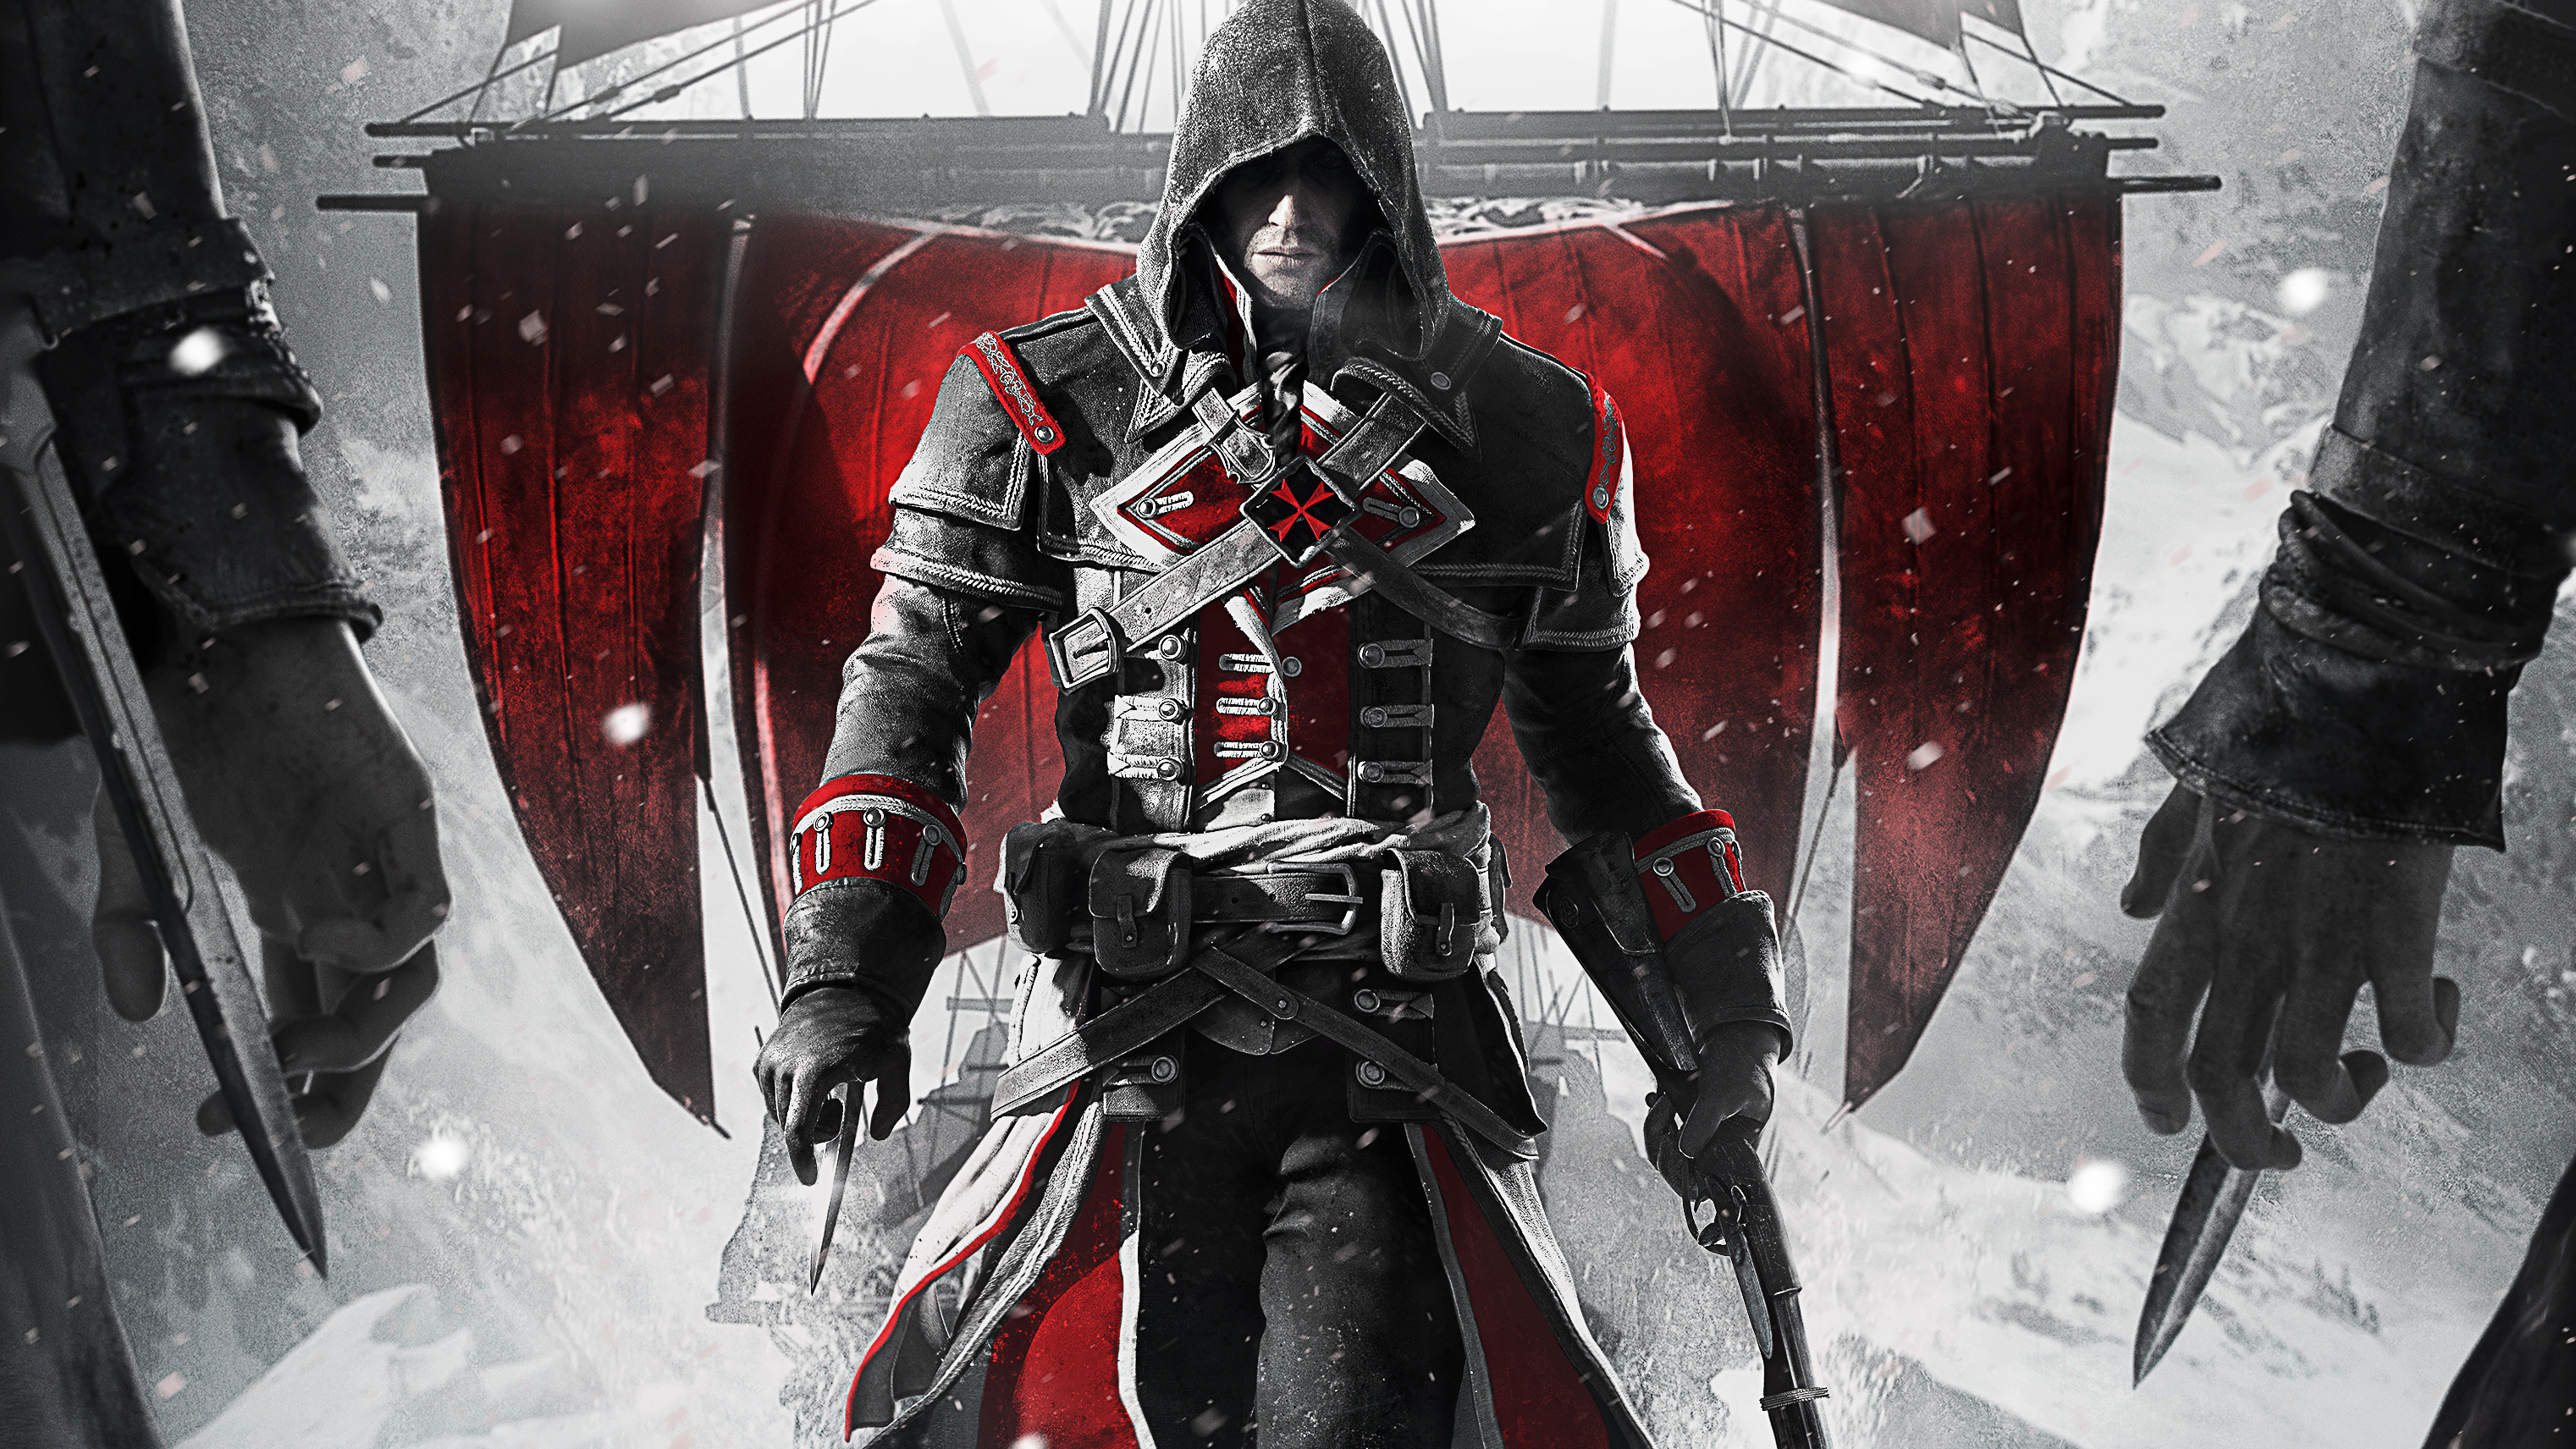 ac rogue wallpaper,pc game,fictional character,games,winter storm,blizzard